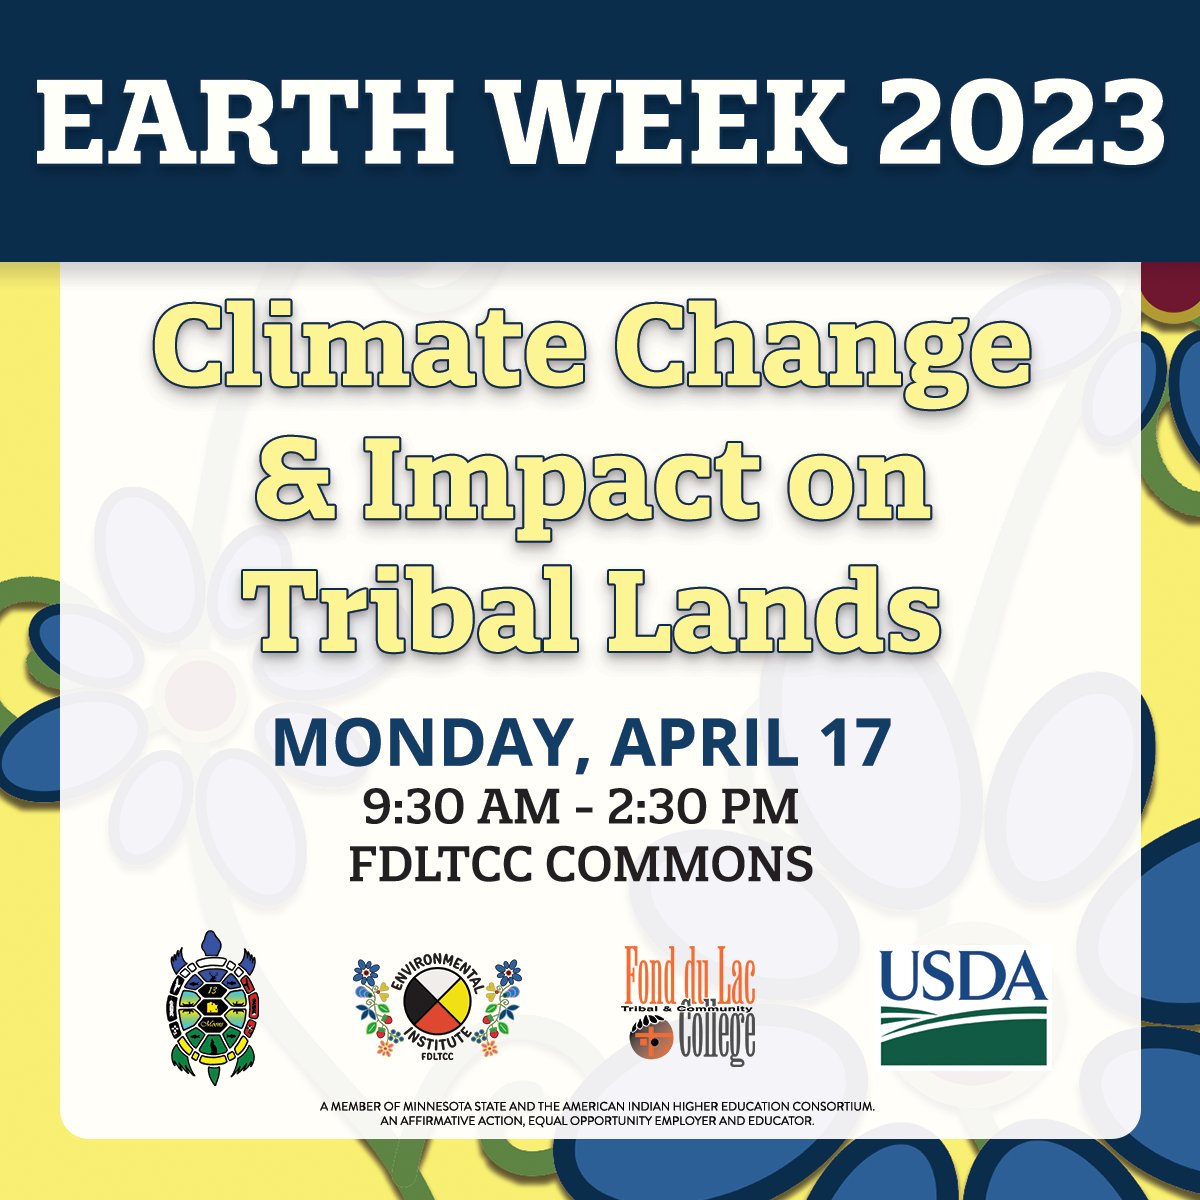 It's #EarthWeek at FDLTCC! Our exciting week of fun and informative events starts with Climate Change on Tribal Lands with 1854 Treaty Authority and @UMNclimate. fdltcc.edu/events-facilit…